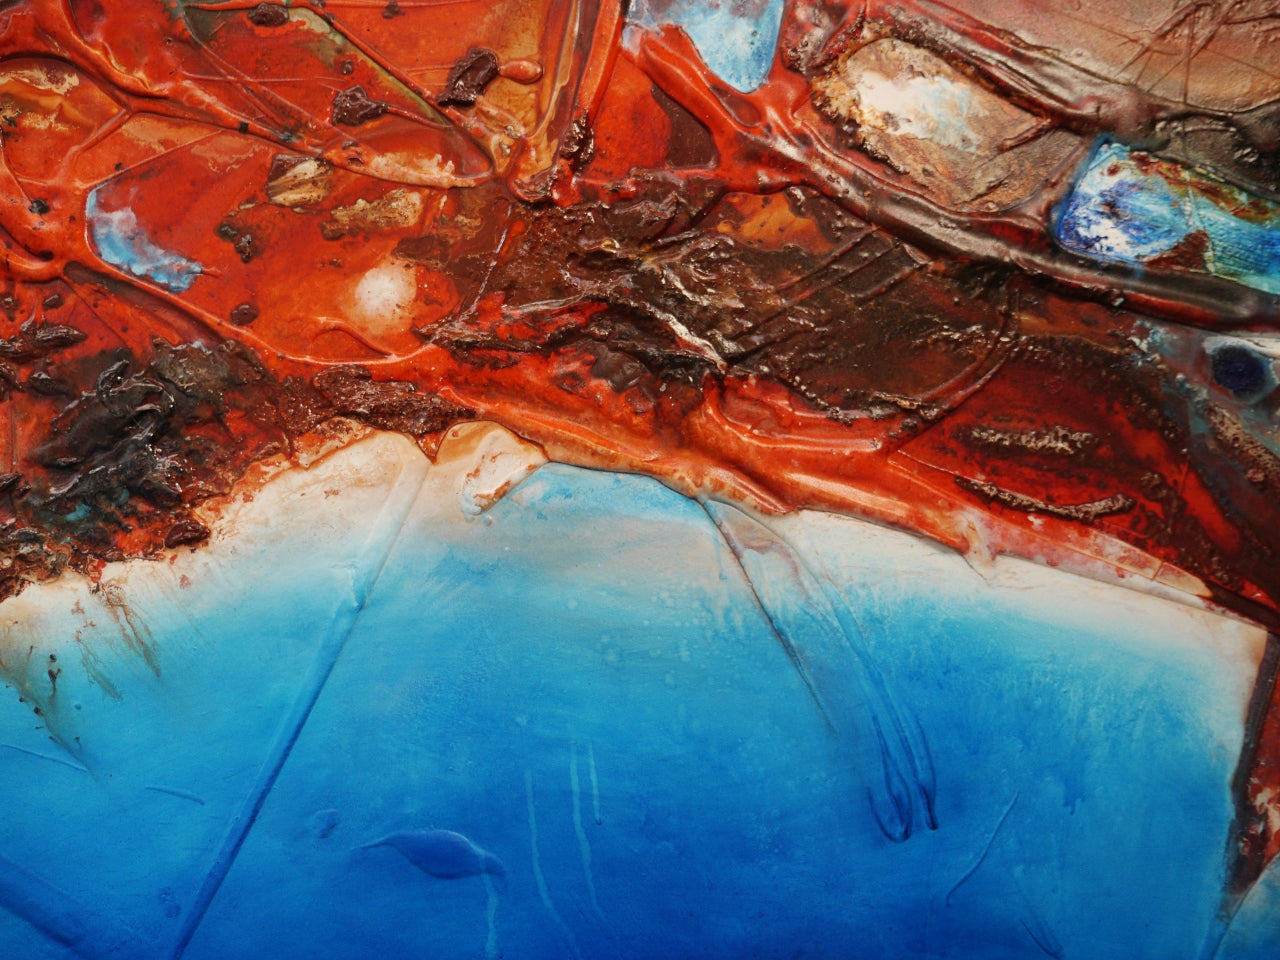 Sunburnt Coast 240cm x 100cm Textured Abstract Painting (SOLD)